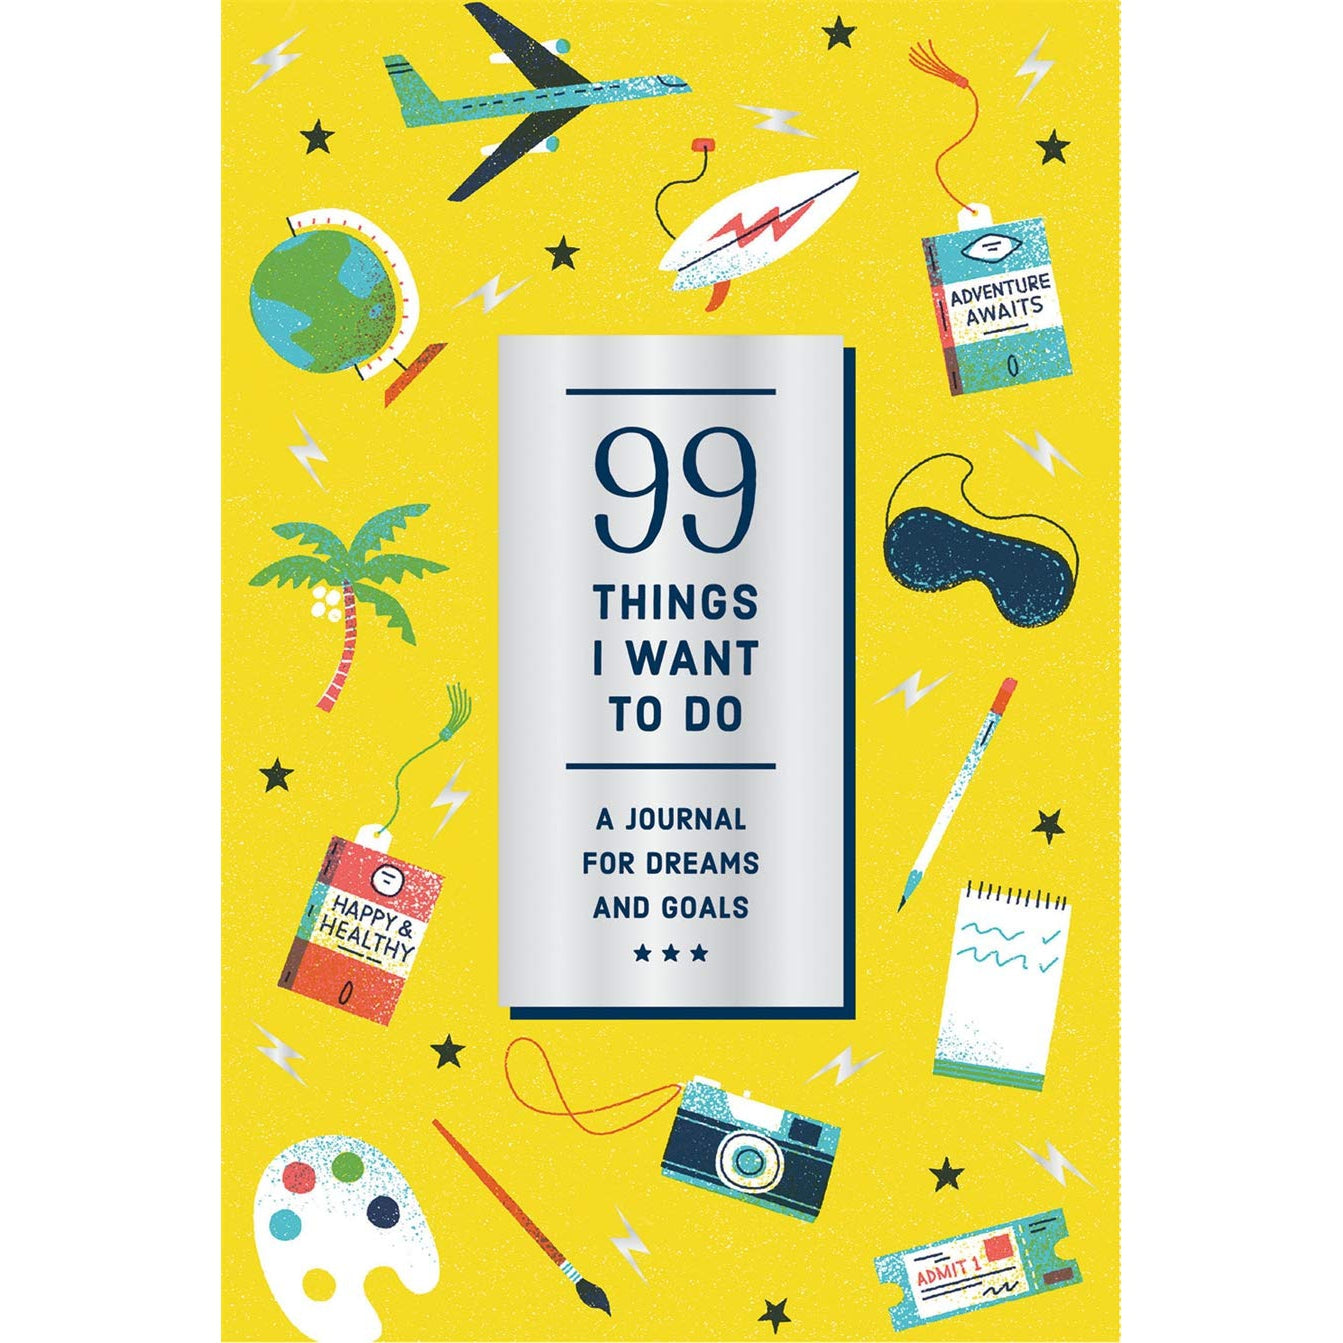 99 Things I Want to Do Guided Journal